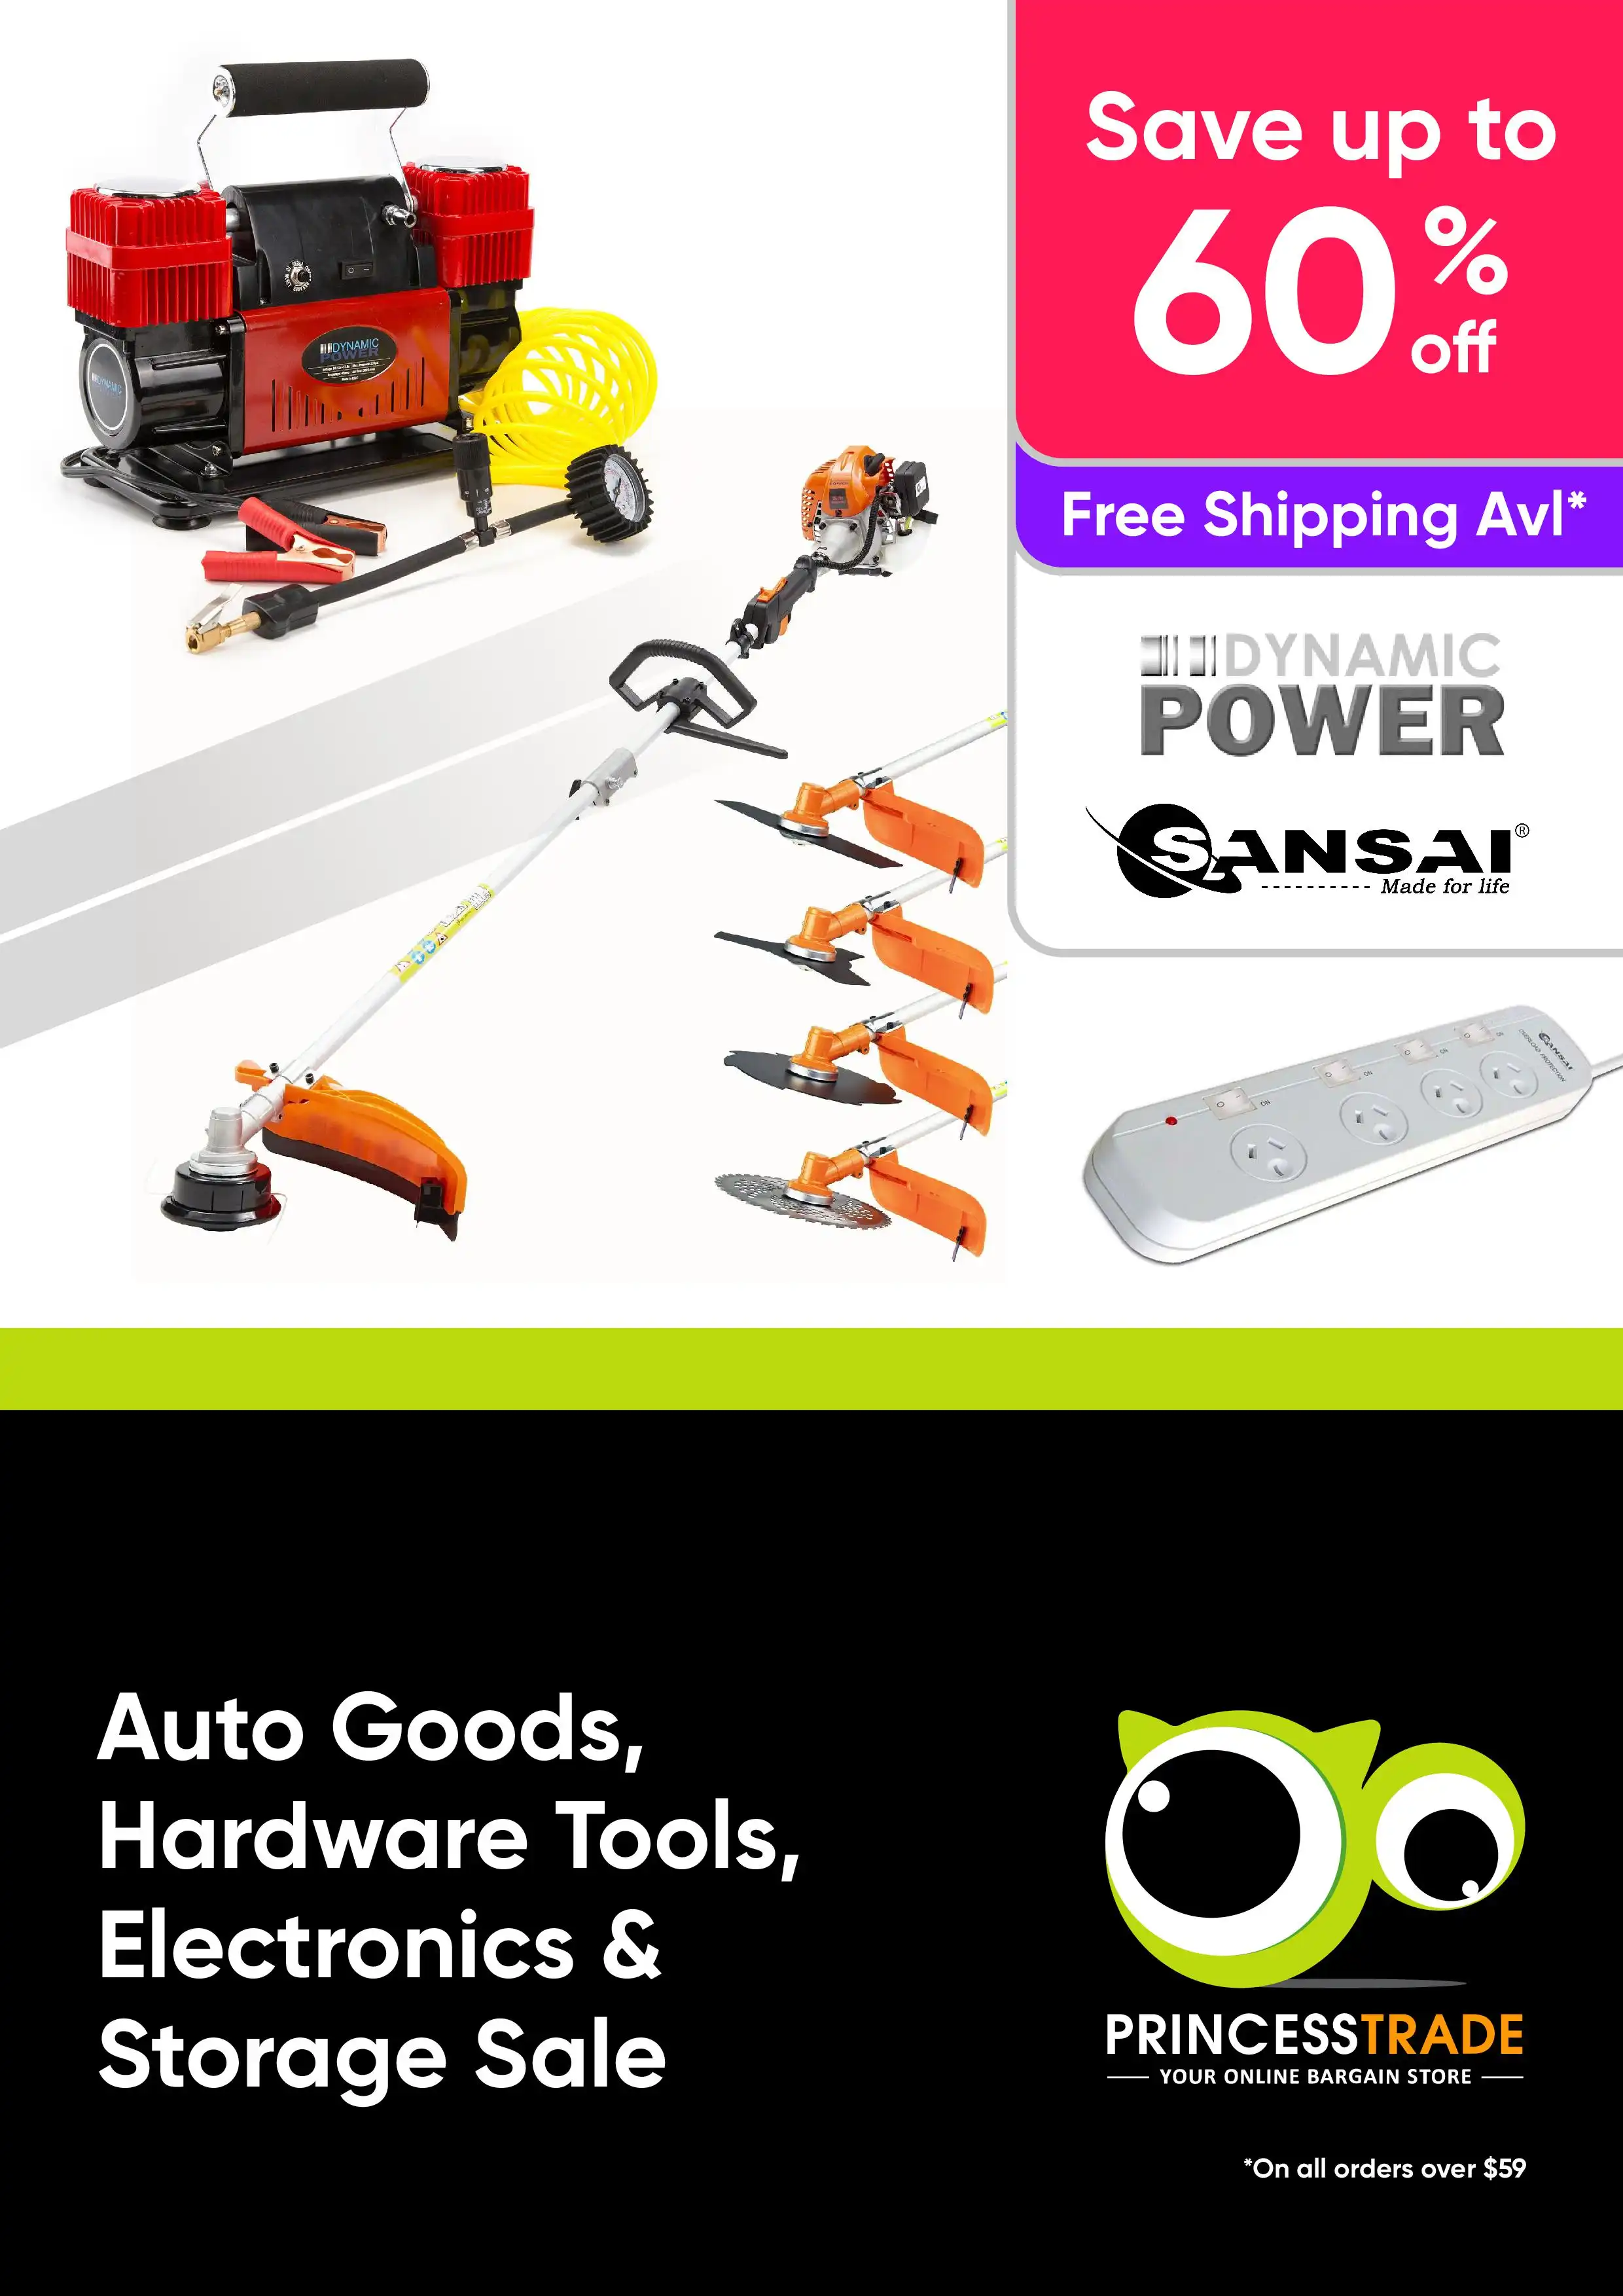 Save Up to 60% Off Auto Goods, Hardware Tools, Electronics & Storage